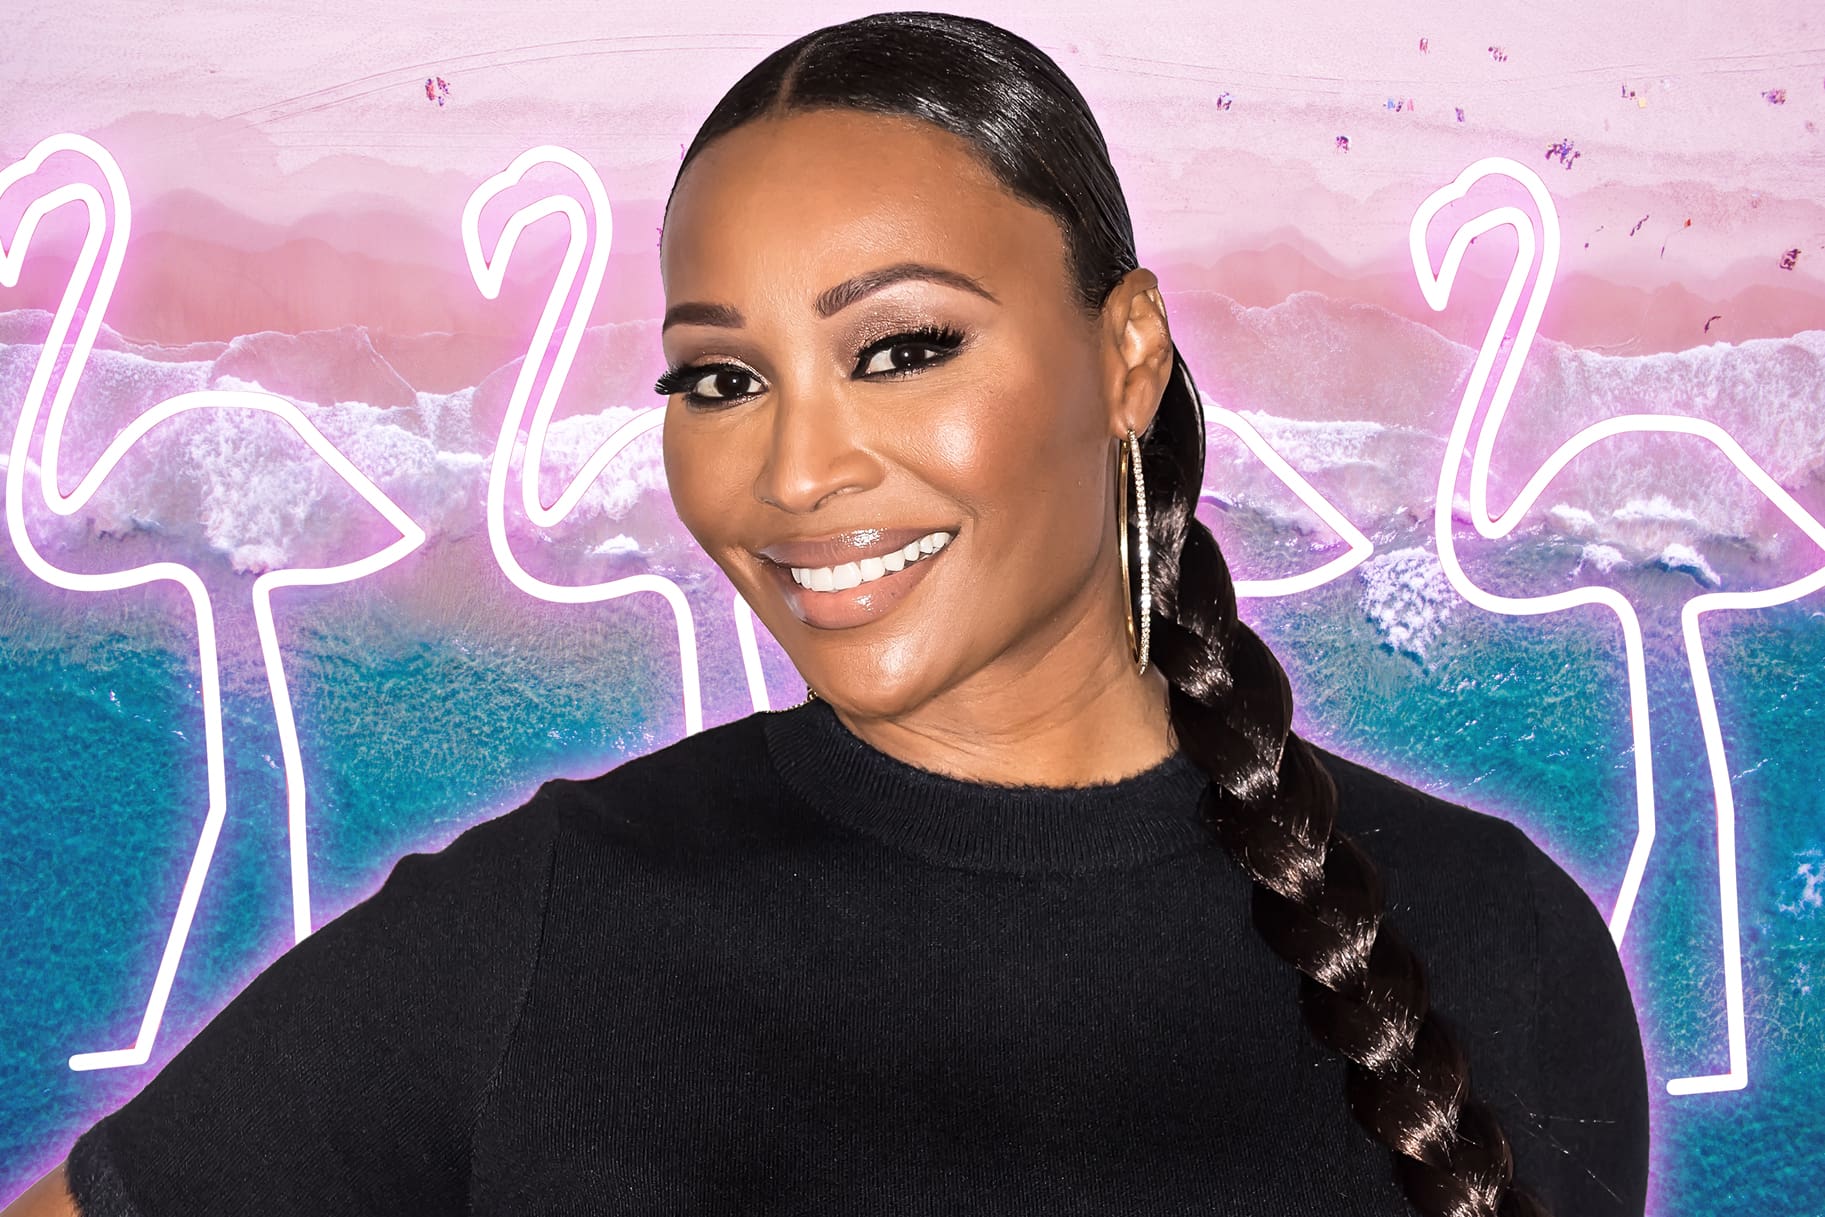 Cynthia Bailey Shares Throwback Photos From Magazine Covers And Haters Accuse Her Of Using Satanic Symbols